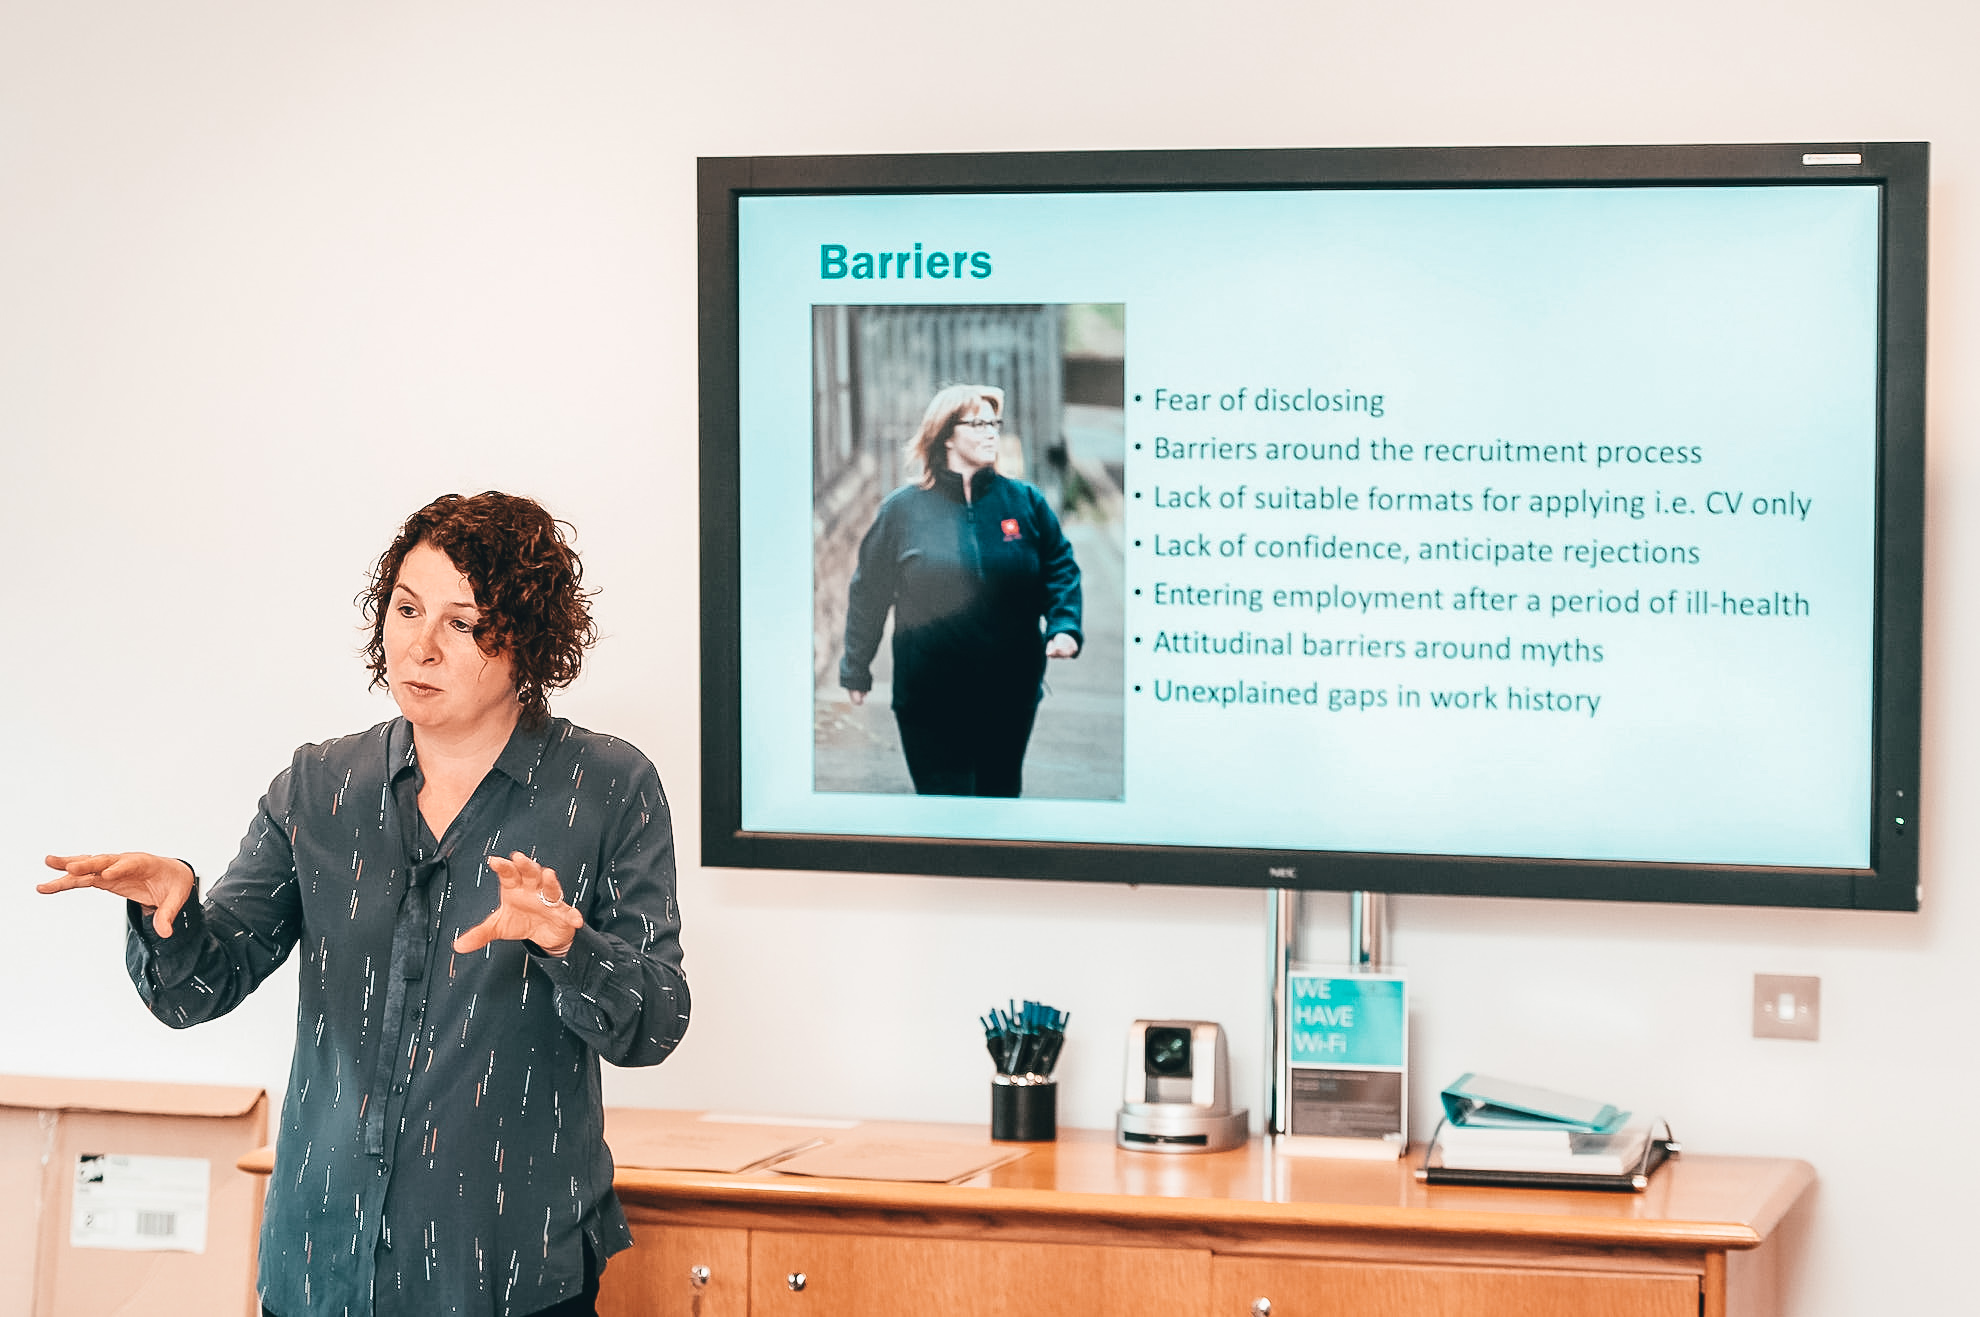 A woman presents a talk to a room, with a whiteboard on the wall behind displaying information under the heading 